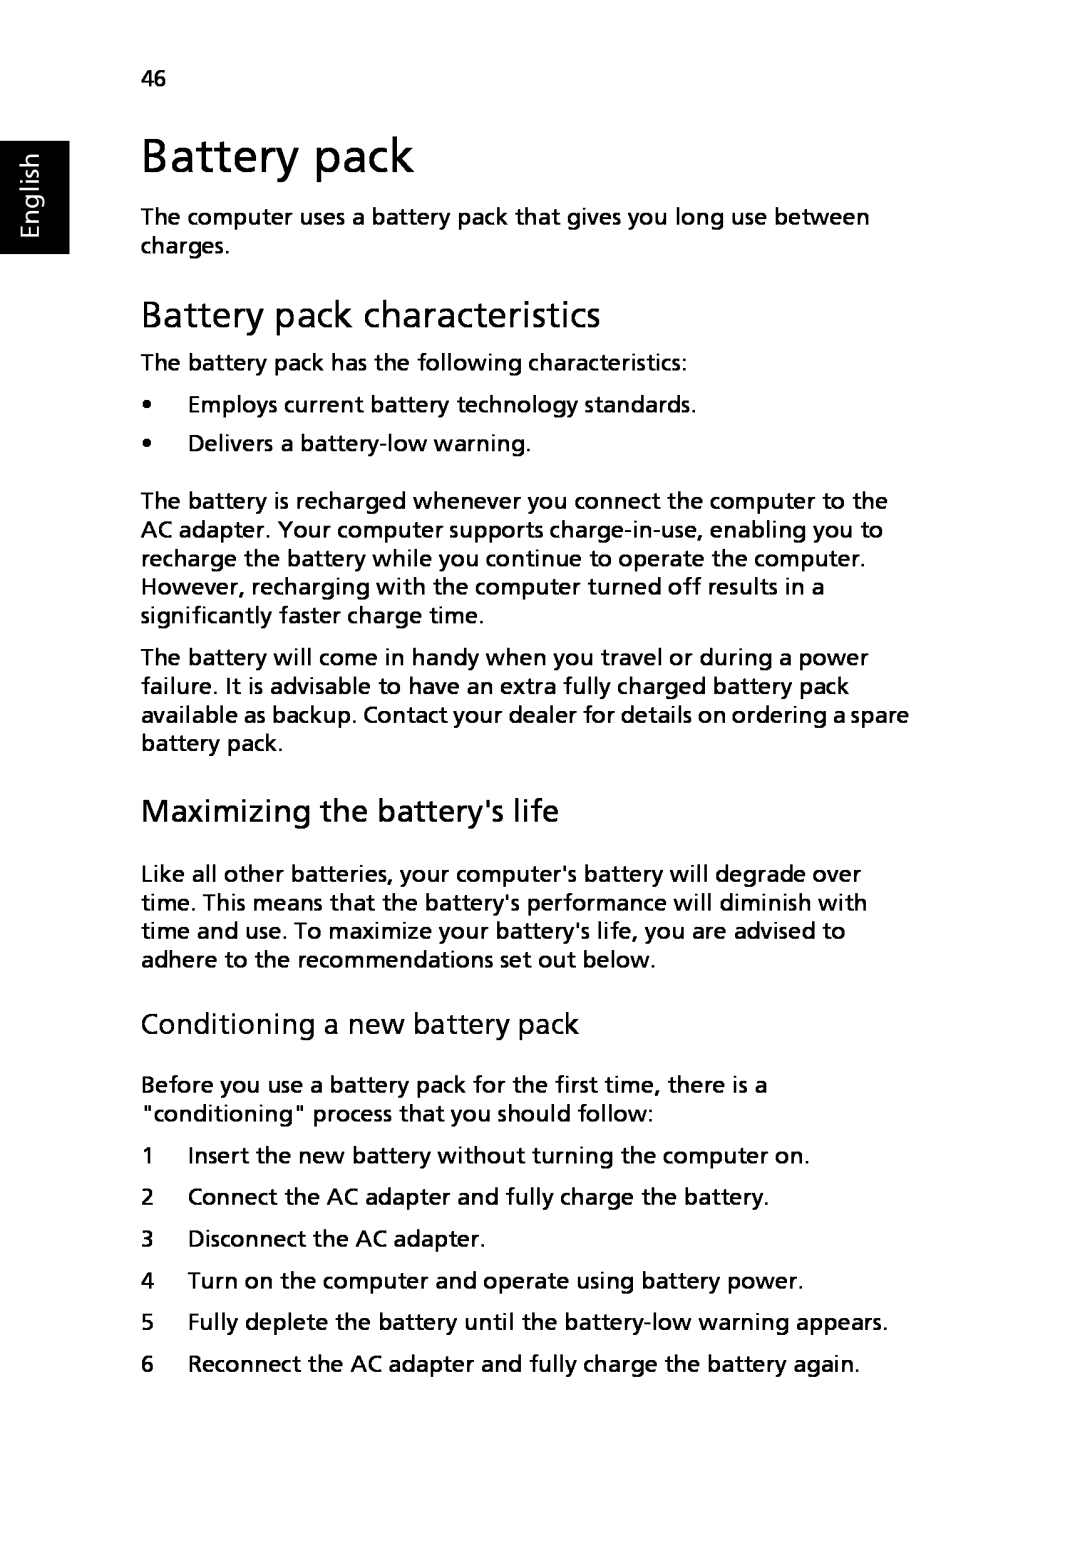 Acer 9120 manual Battery pack characteristics, Maximizing the batterys life, Conditioning a new battery pack, English 